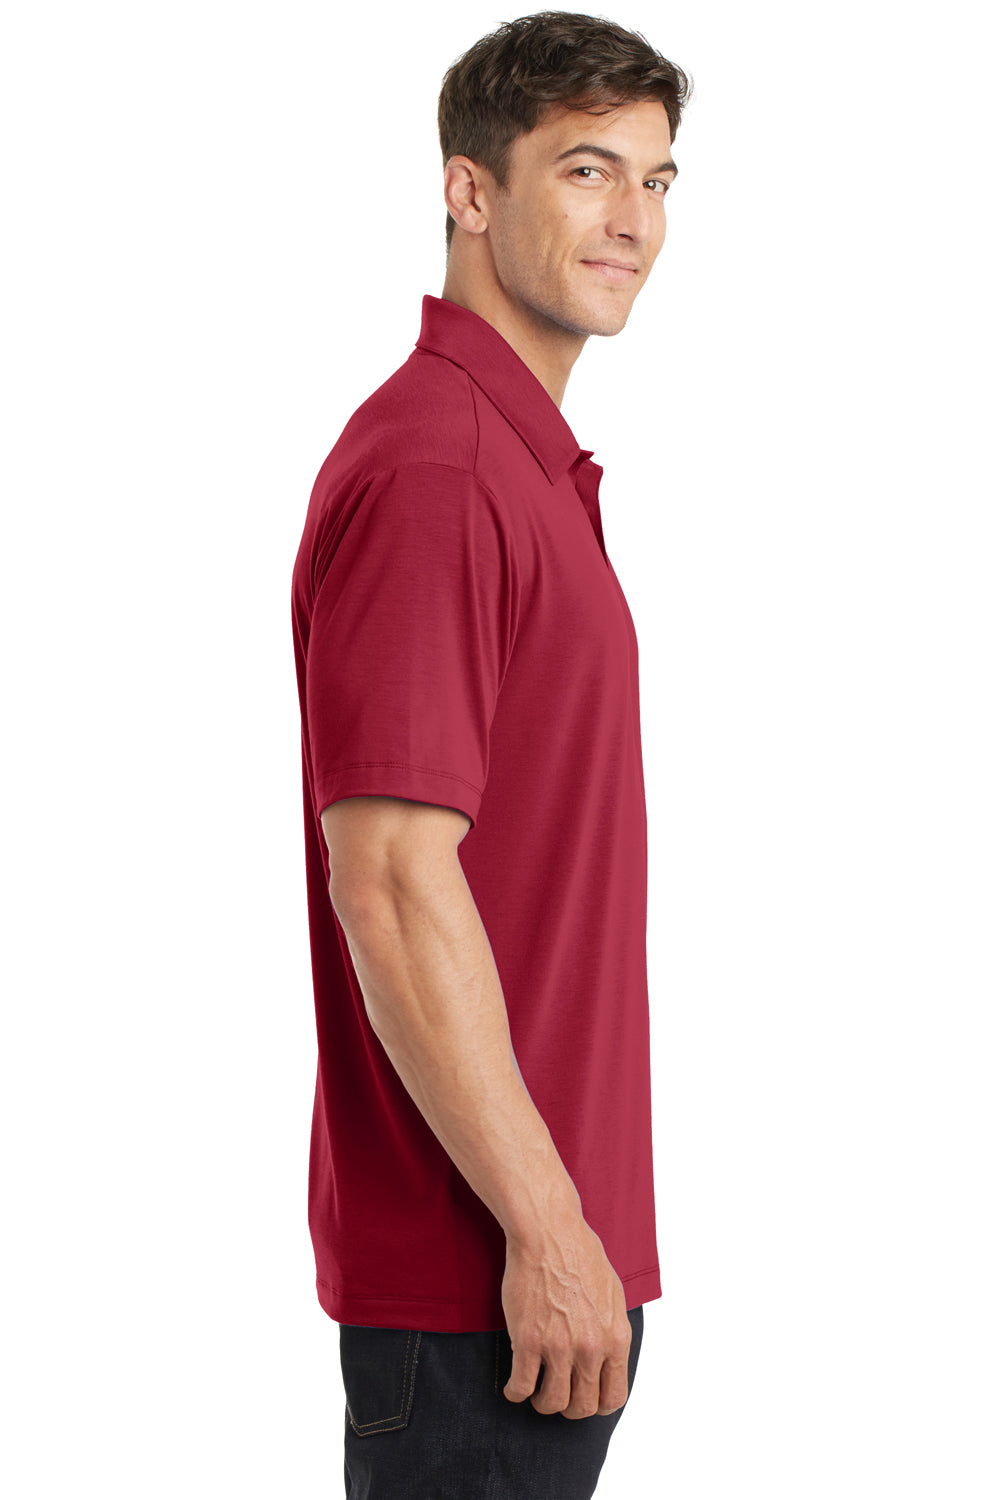 Port Authority K568 Mens Cotton Touch Performance Moisture Wicking Short Sleeve Polo Shirt Red Side